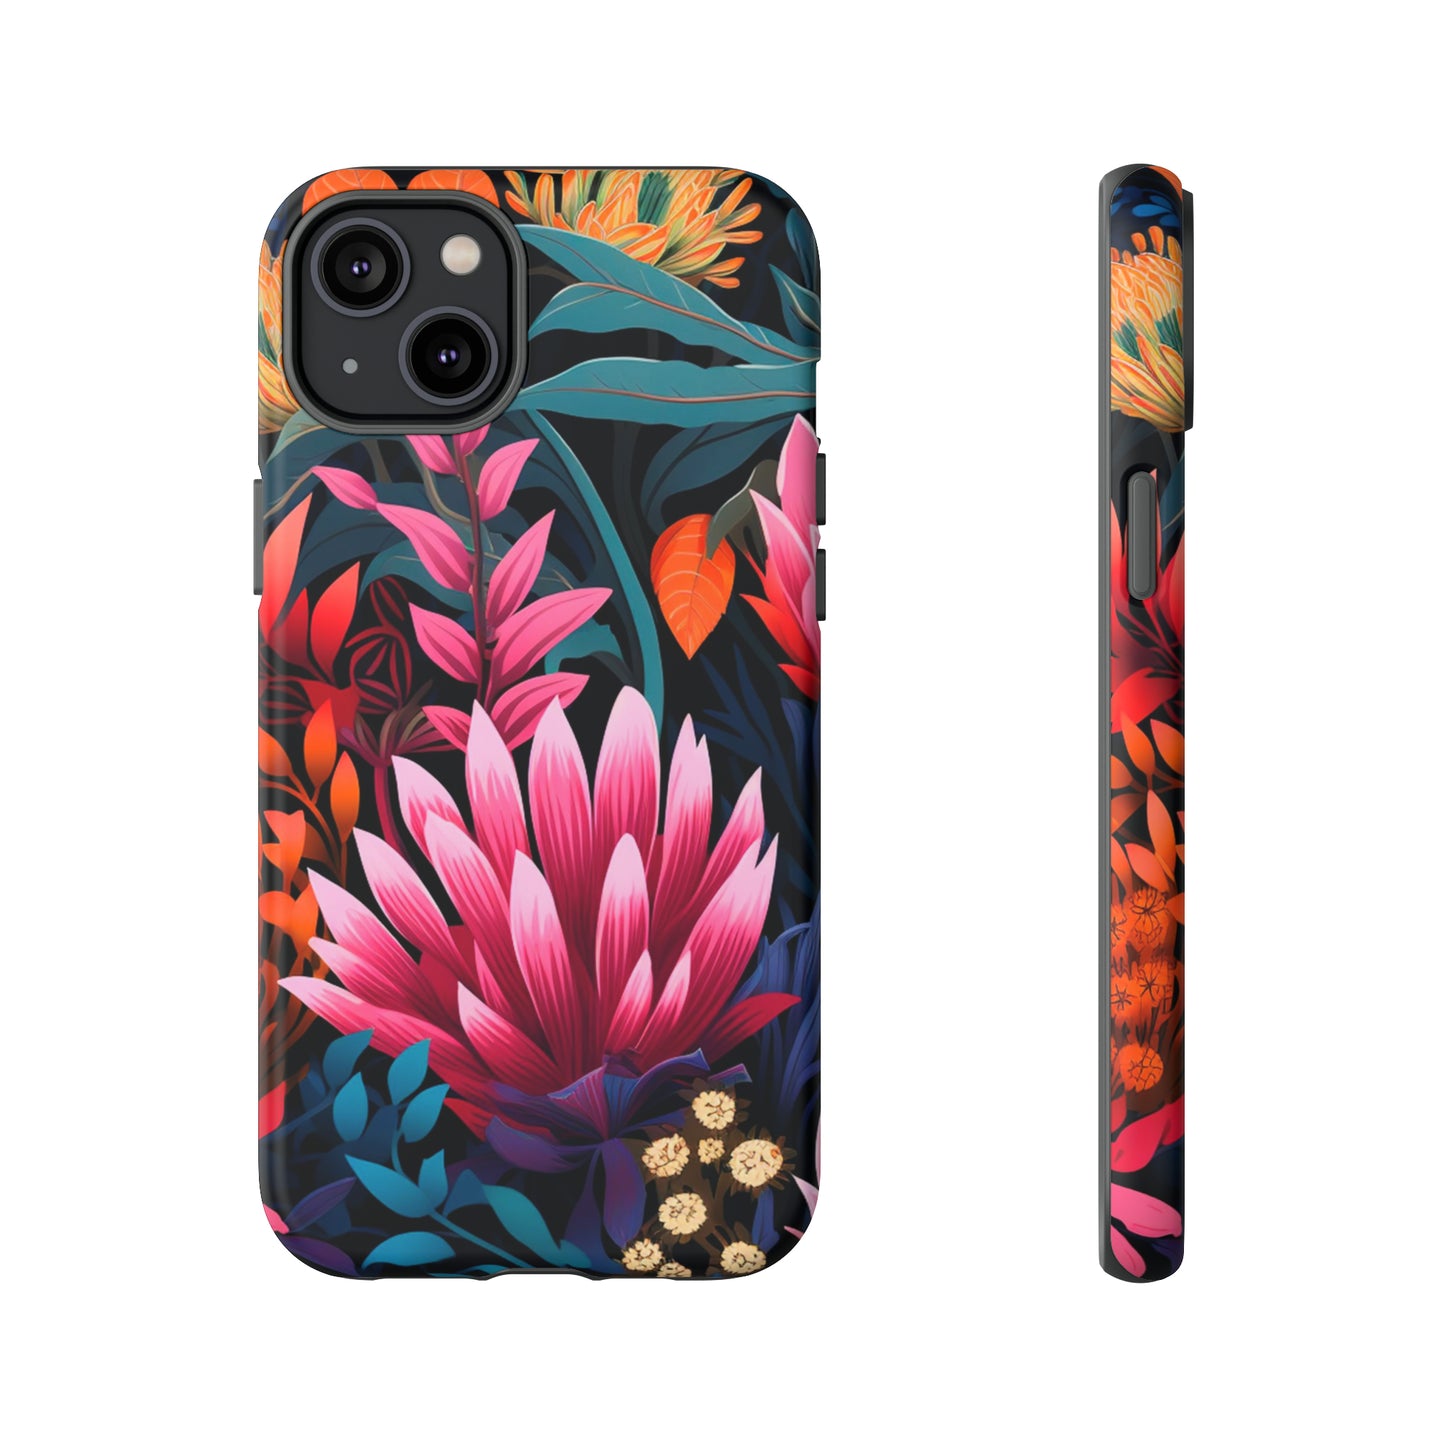 IPhone Cases, Colorful Floral IPhone Cases